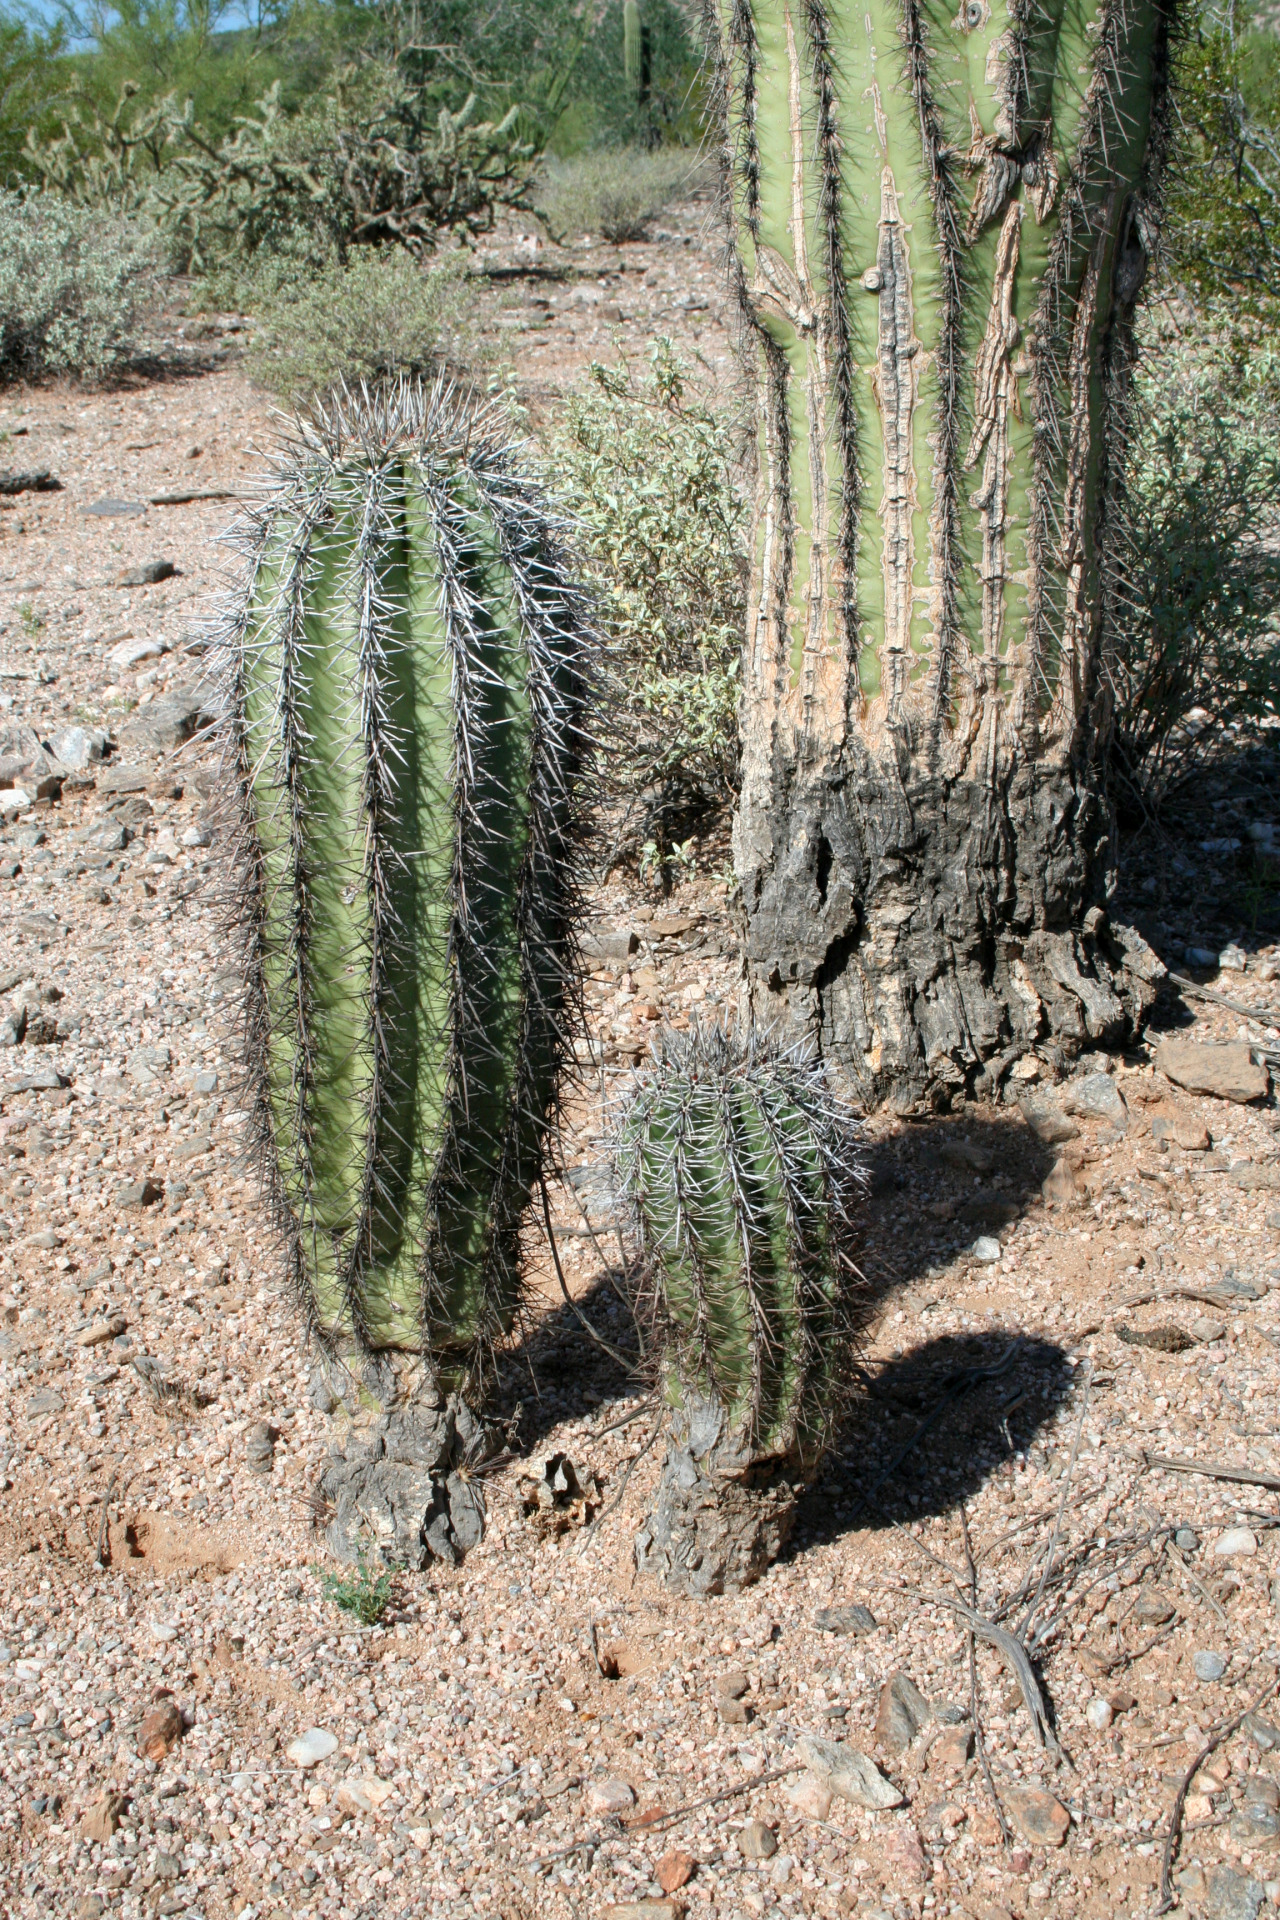 Offspring / Sonoran Desert National Monument, Arizona
Ultimately, this little guy probably doesn’t stand a chance, but he looks strong for now.
Anyone have any good research on (1) saguaro distribution patterns and (2) maturation rates...